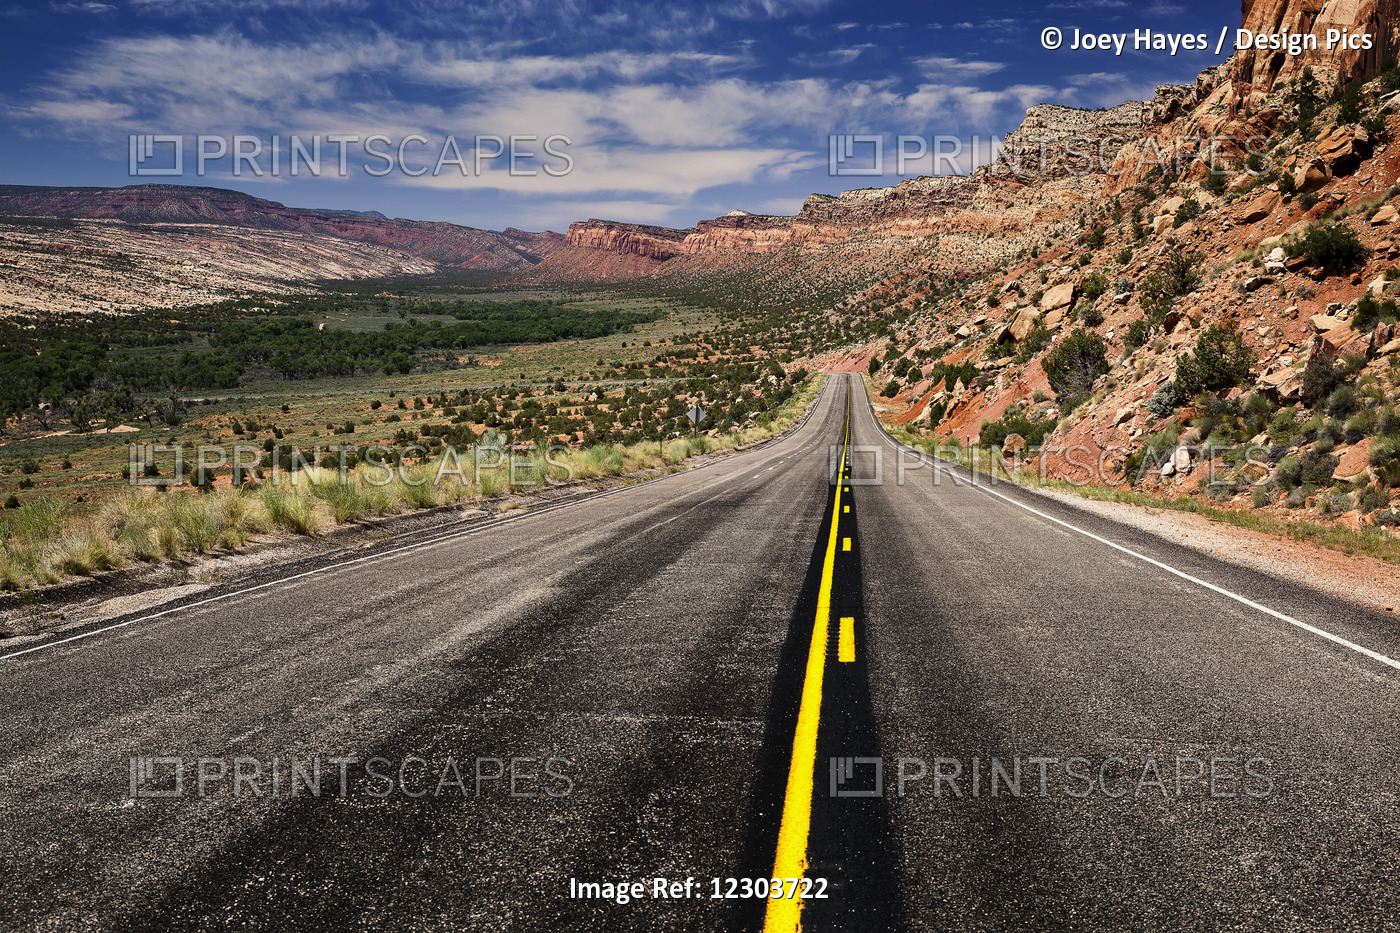 Utah Highway Stretching Into The Distance With Rock Cliffs Wrapping From The ...